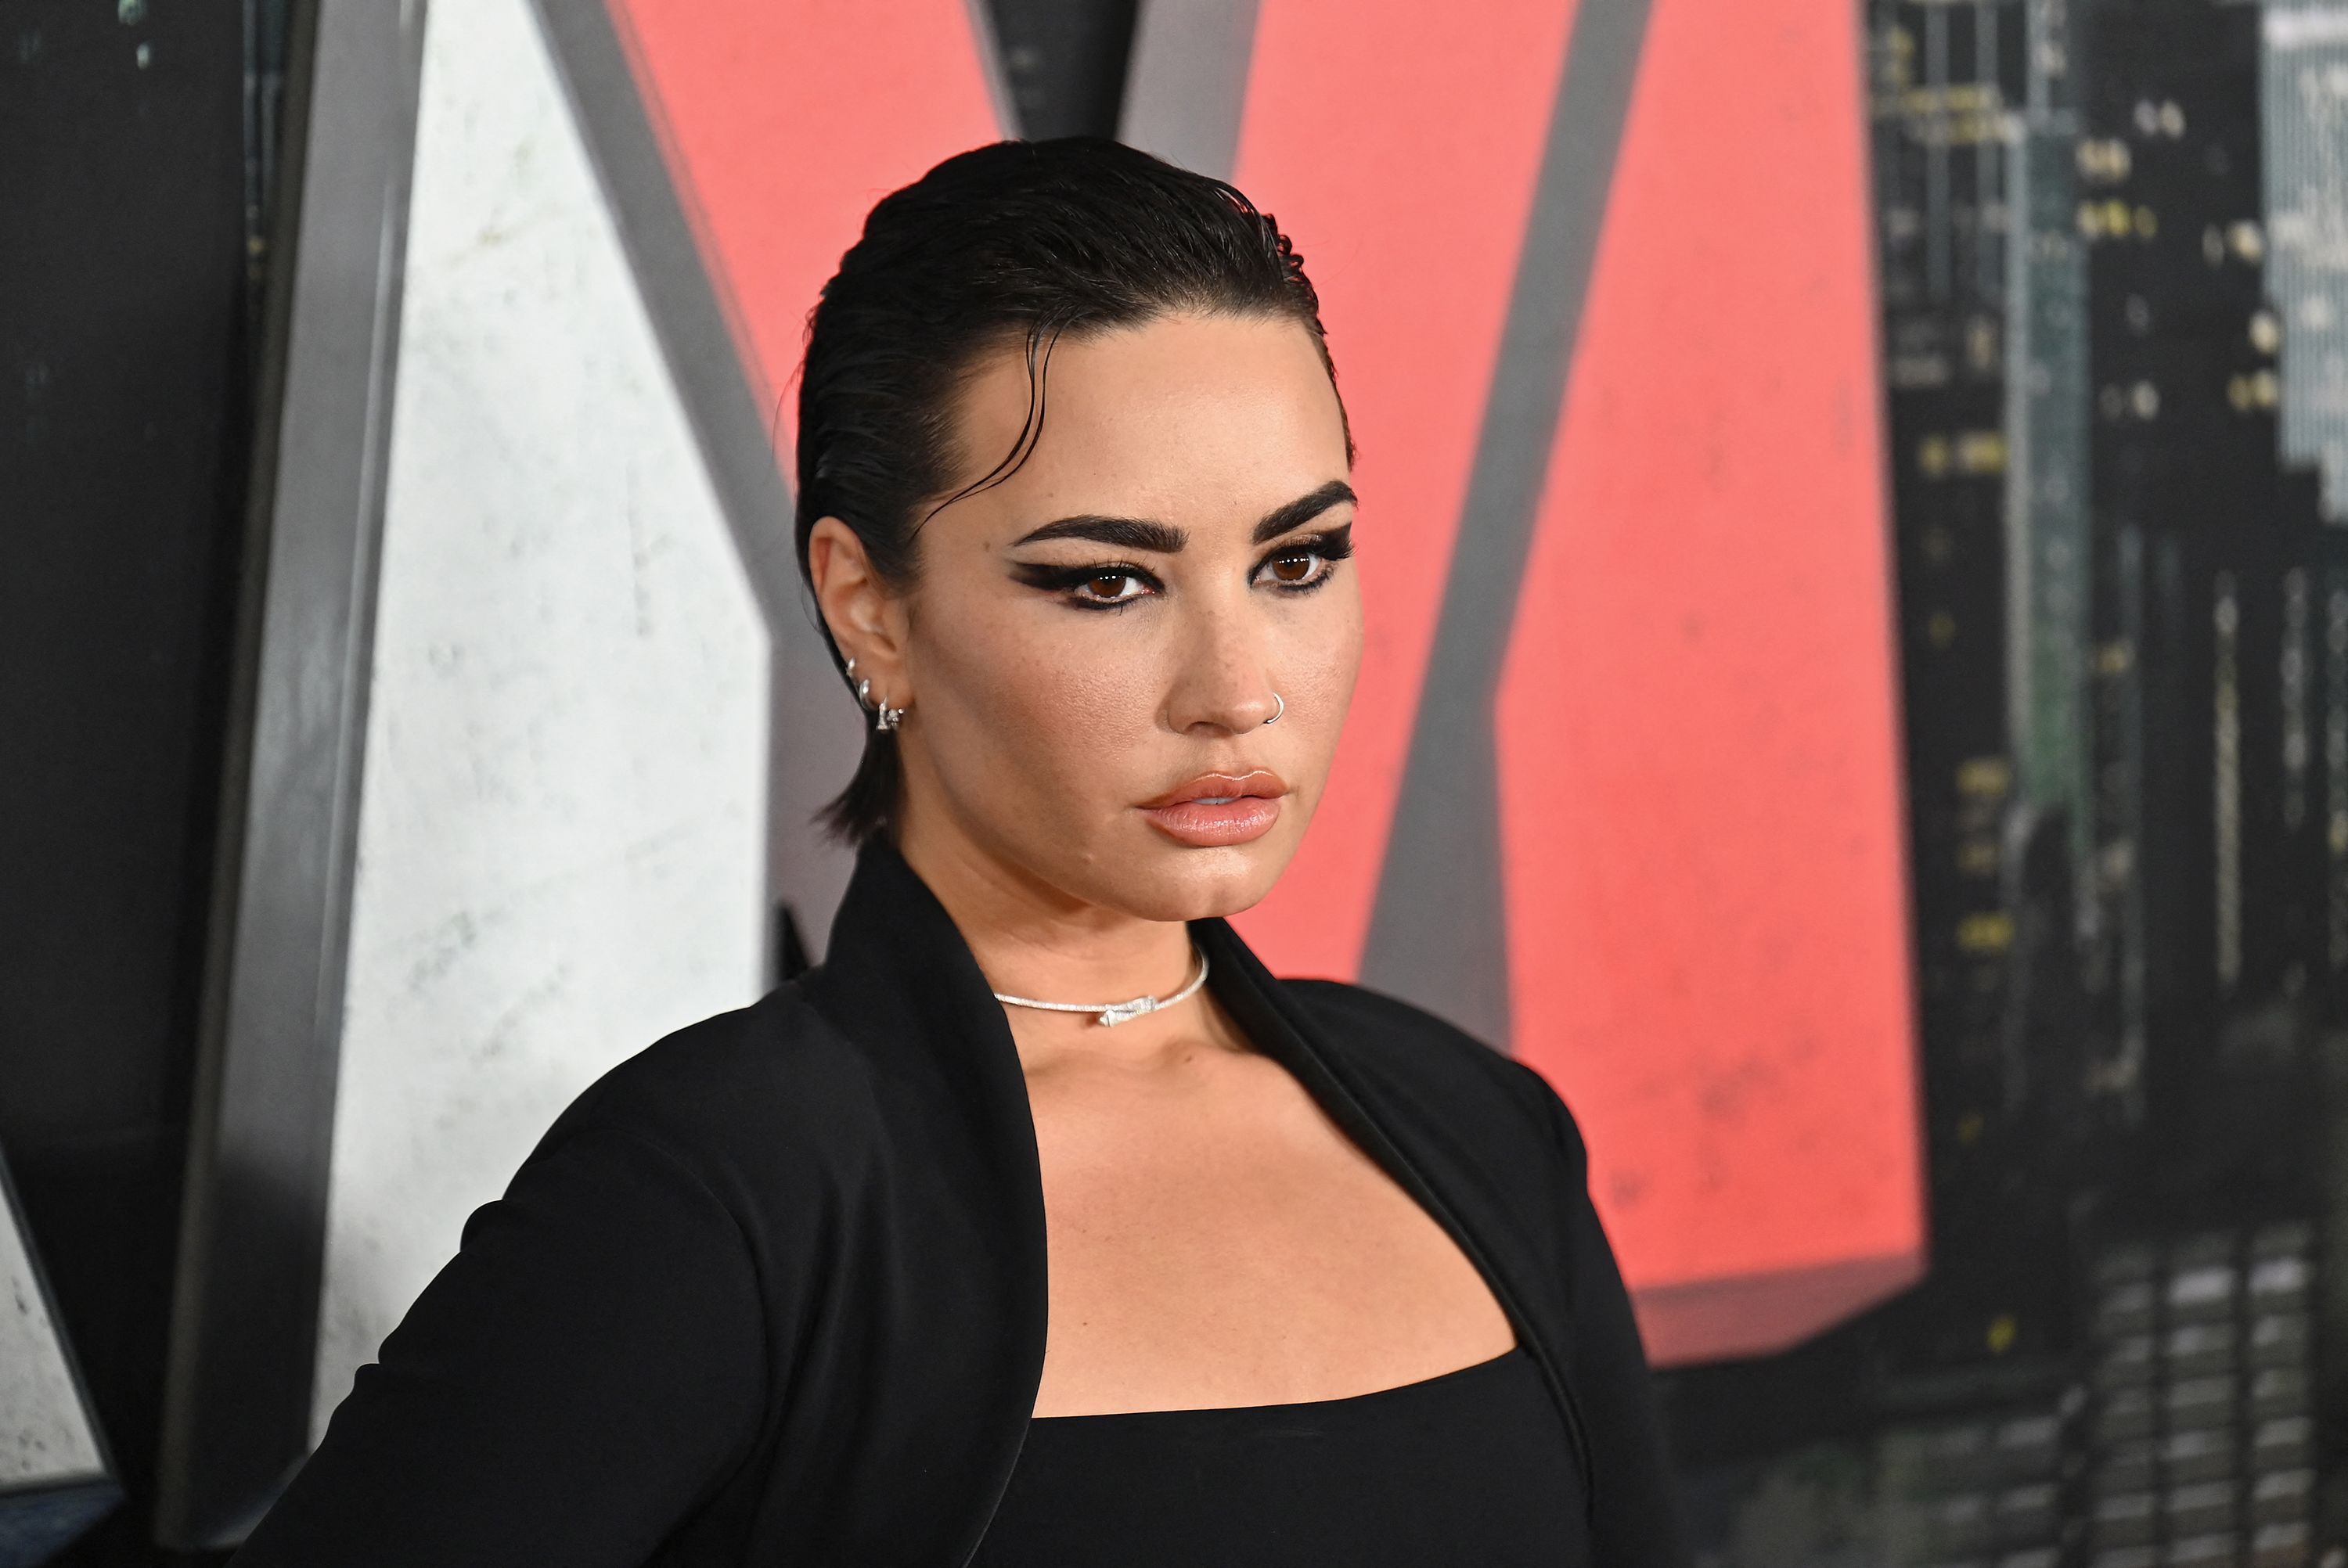 Demi Lovato reveals hearing and vision loss following 2018